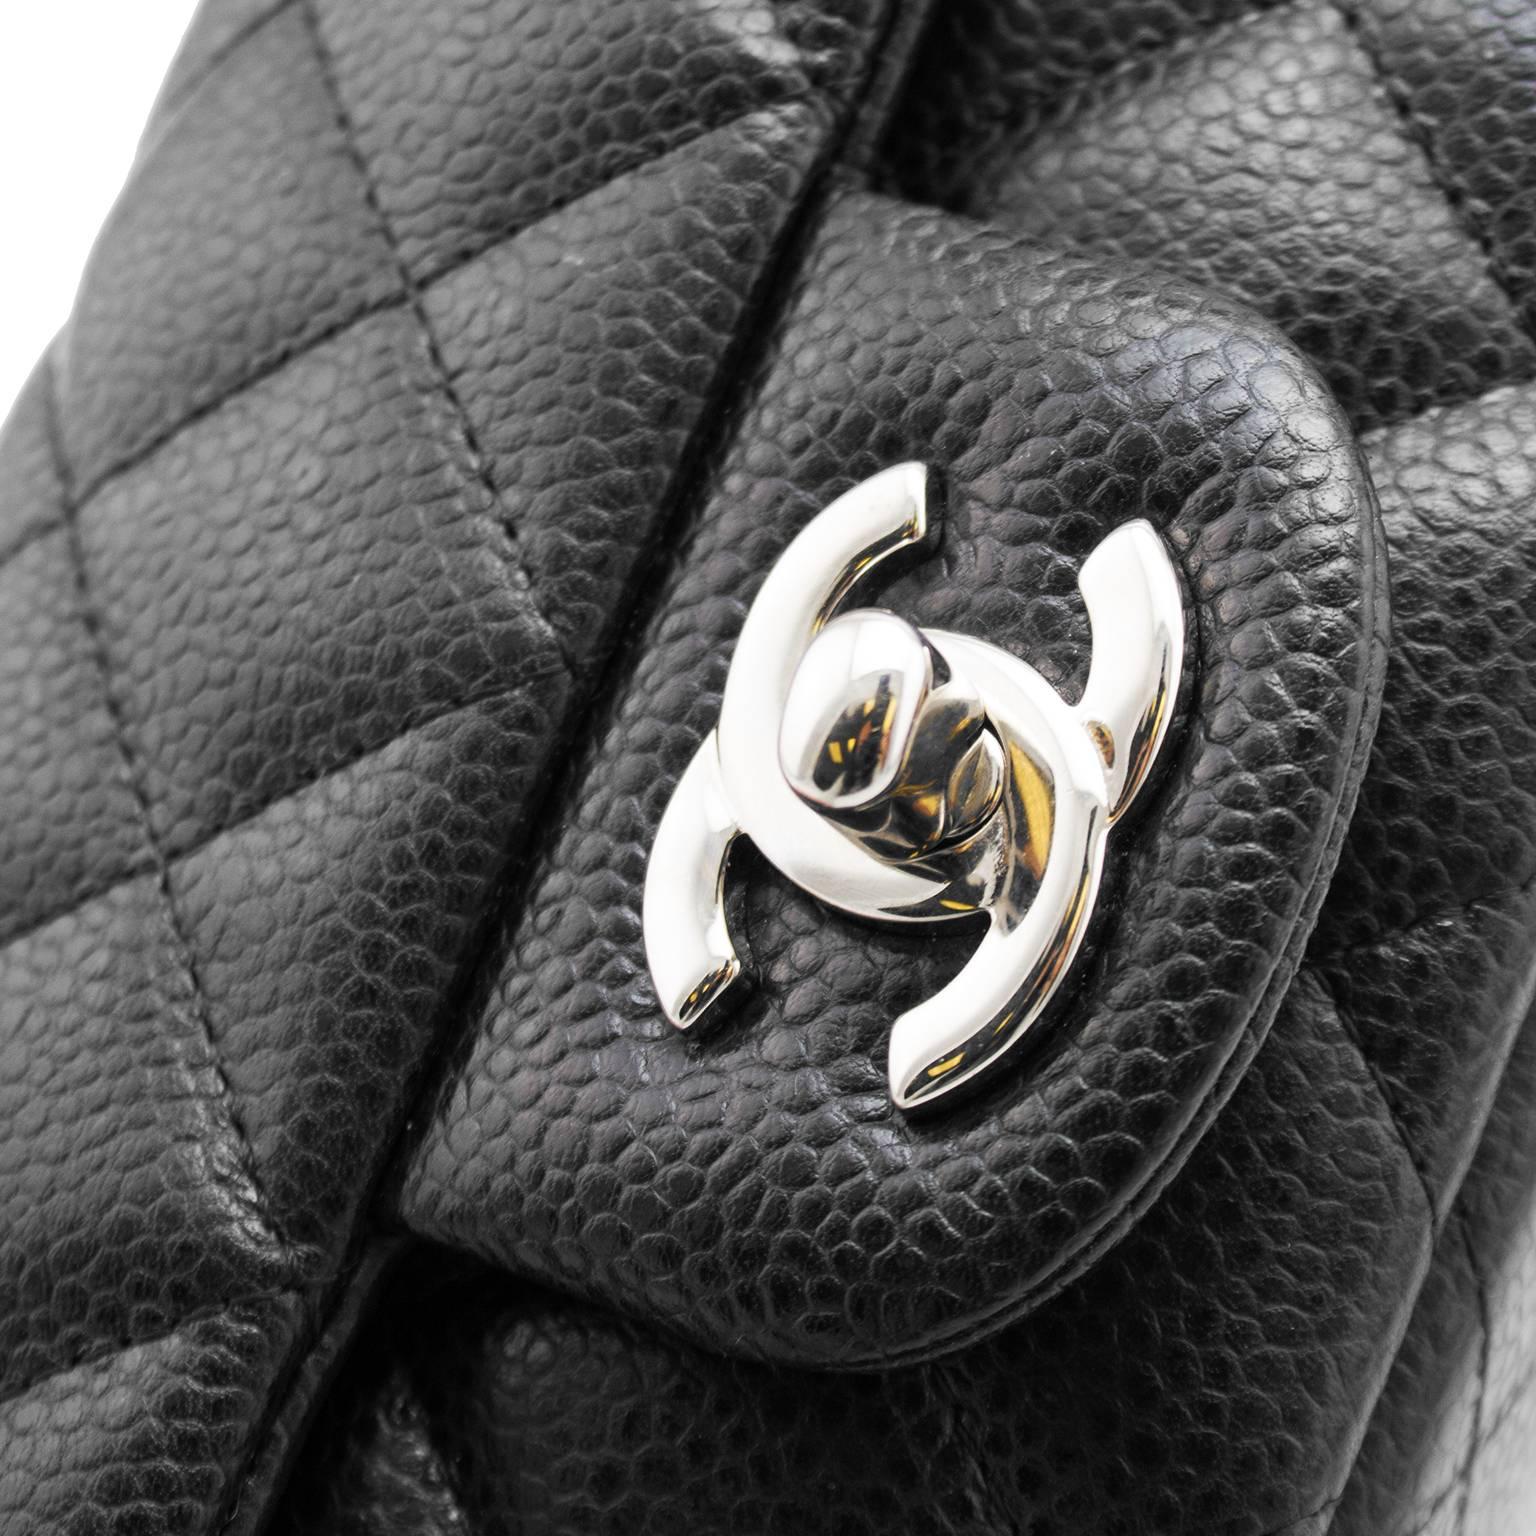 2013 Chanel Black Quilted Caviar Leather Chanel Classic Mini Flap Bag 2